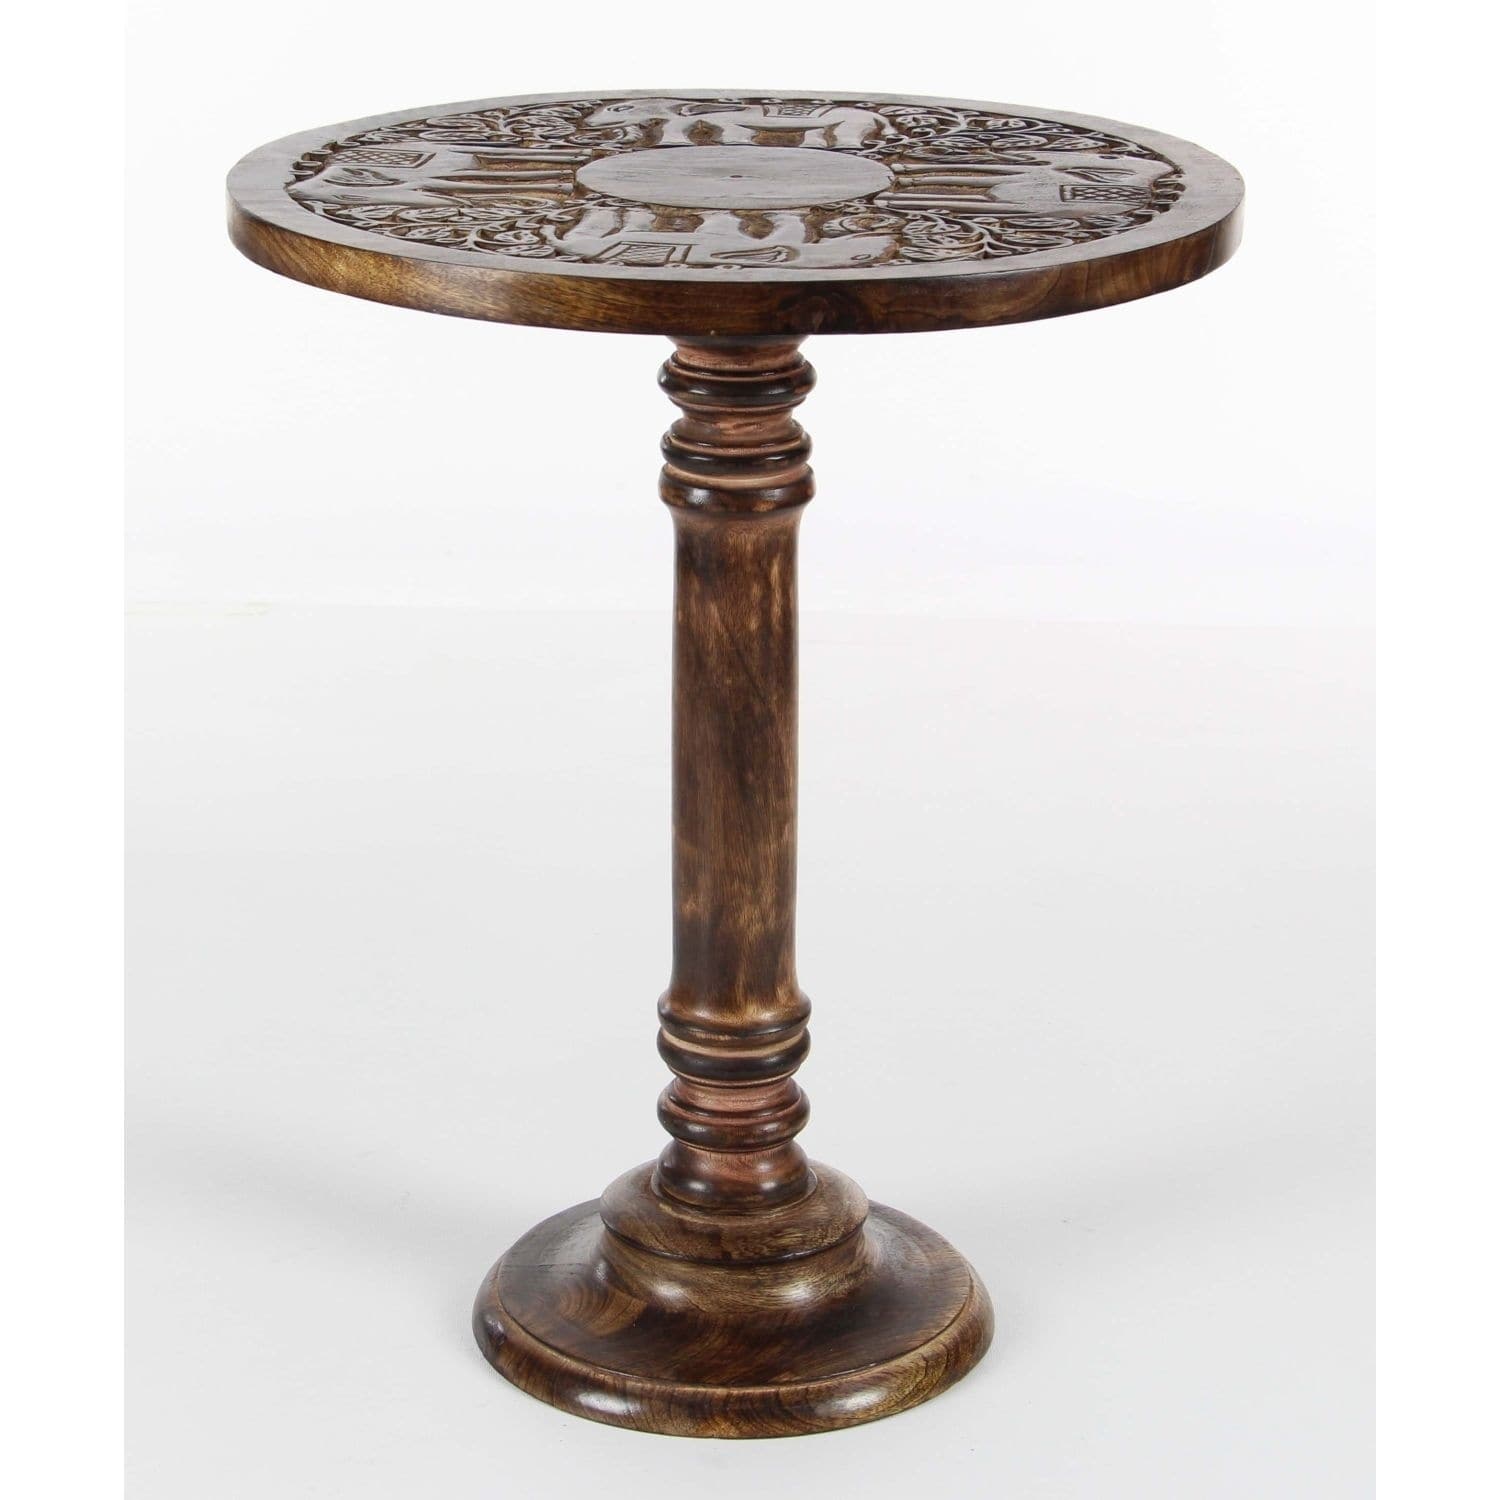 studio wood elephant accent table inches wide high free shipping today target cocktail small round marble side kitchen sets for polka dot tablecloth home accents inch console